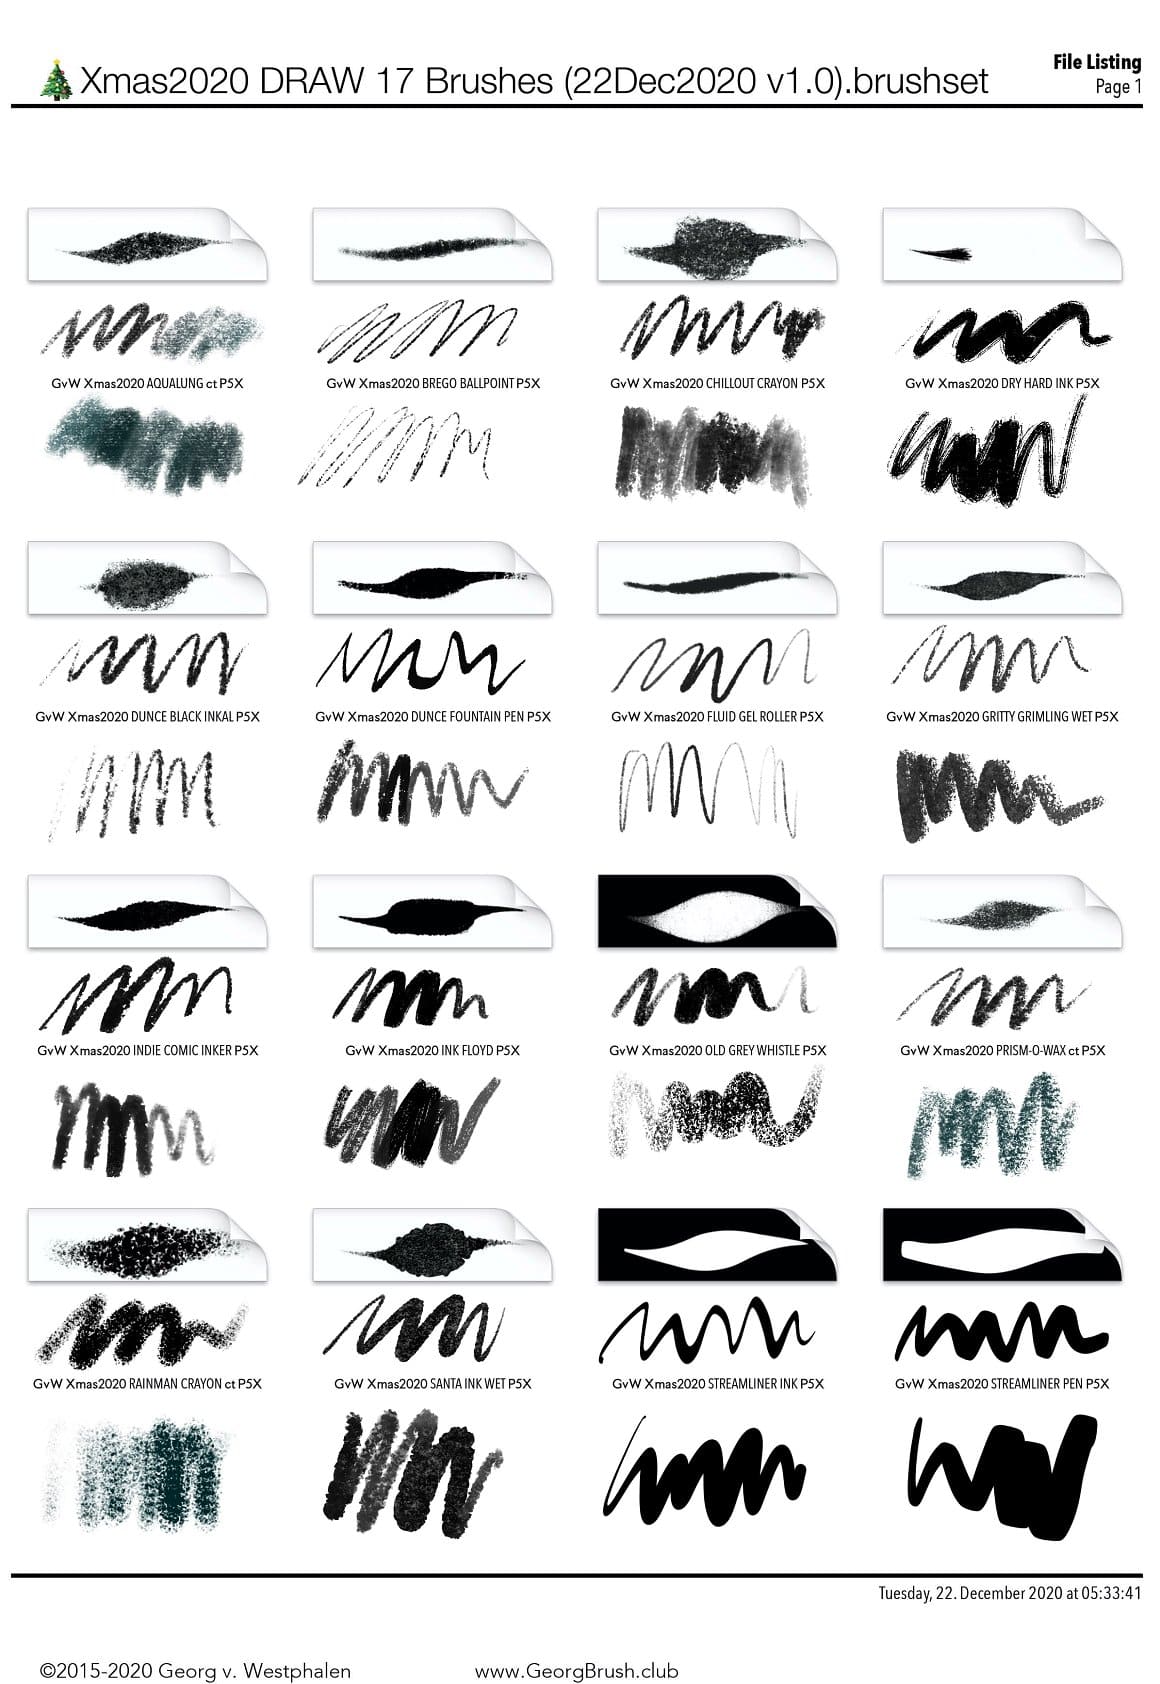 Xmas 2020 Draw 17 Brushes artwork, 1160 by 1684 pixels.